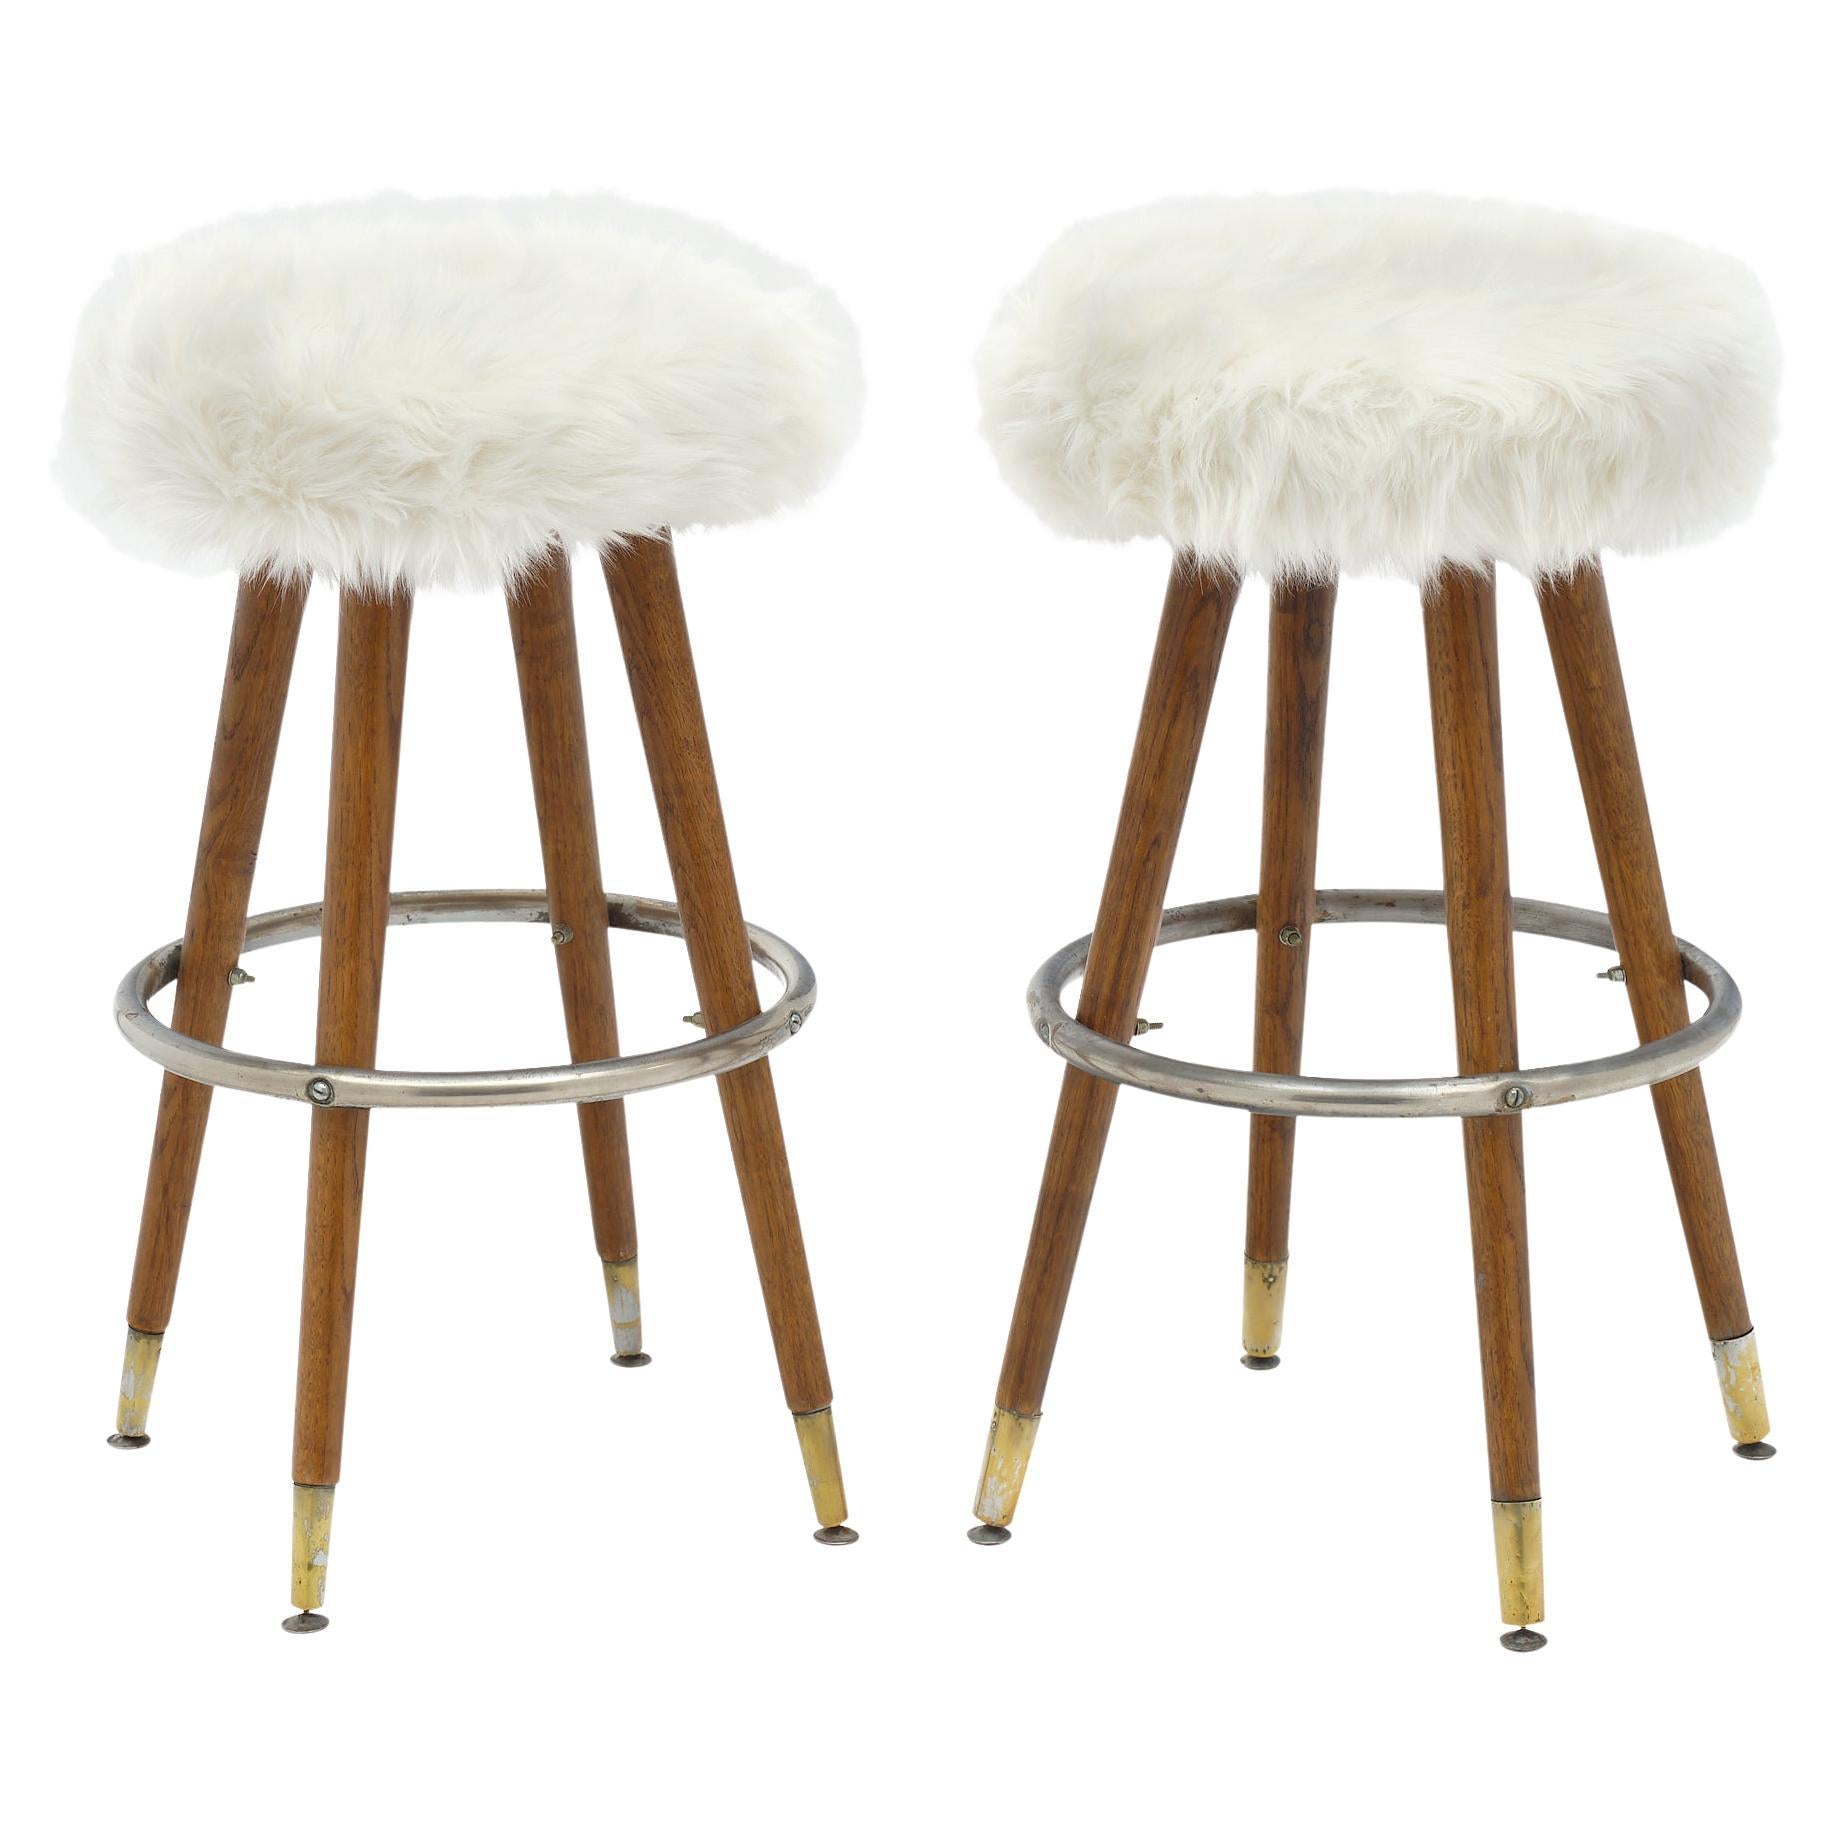 Vintage French Bar Stools For At, Fur Covered Bar Stools